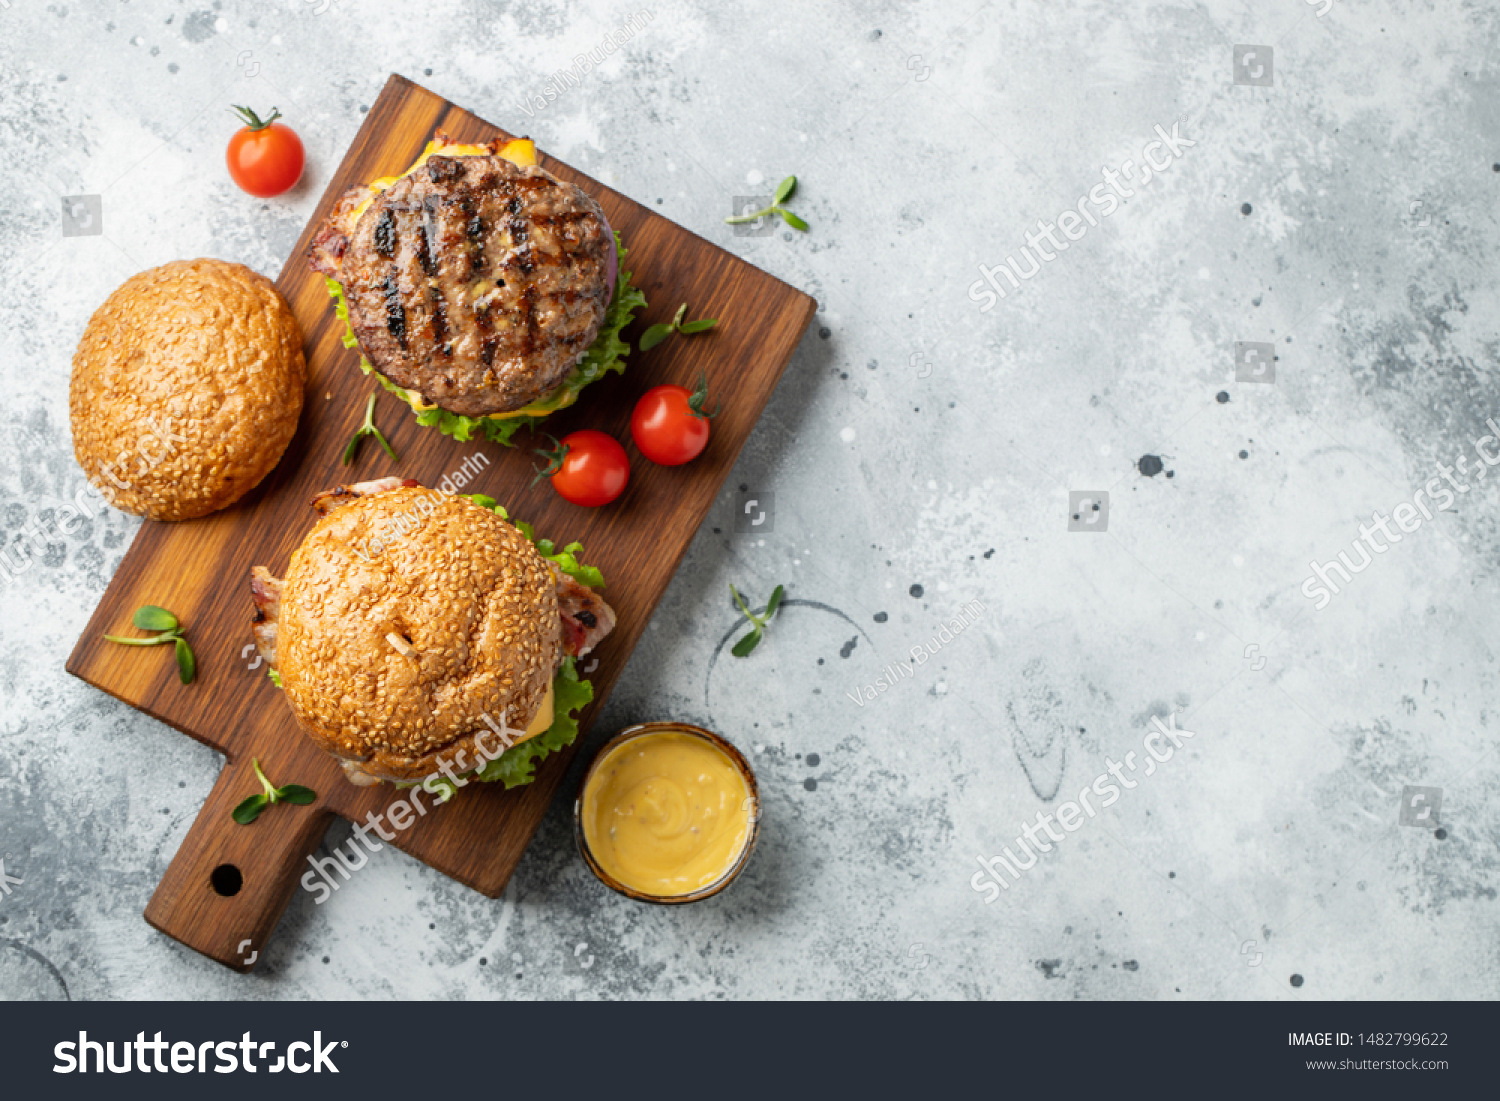 Tasty grilled home made burger with beef, tomato, cheese, bacon and lettuce on a light stone background with copy space. Top view. fast food and junk food concept. Flat lay #1482799622